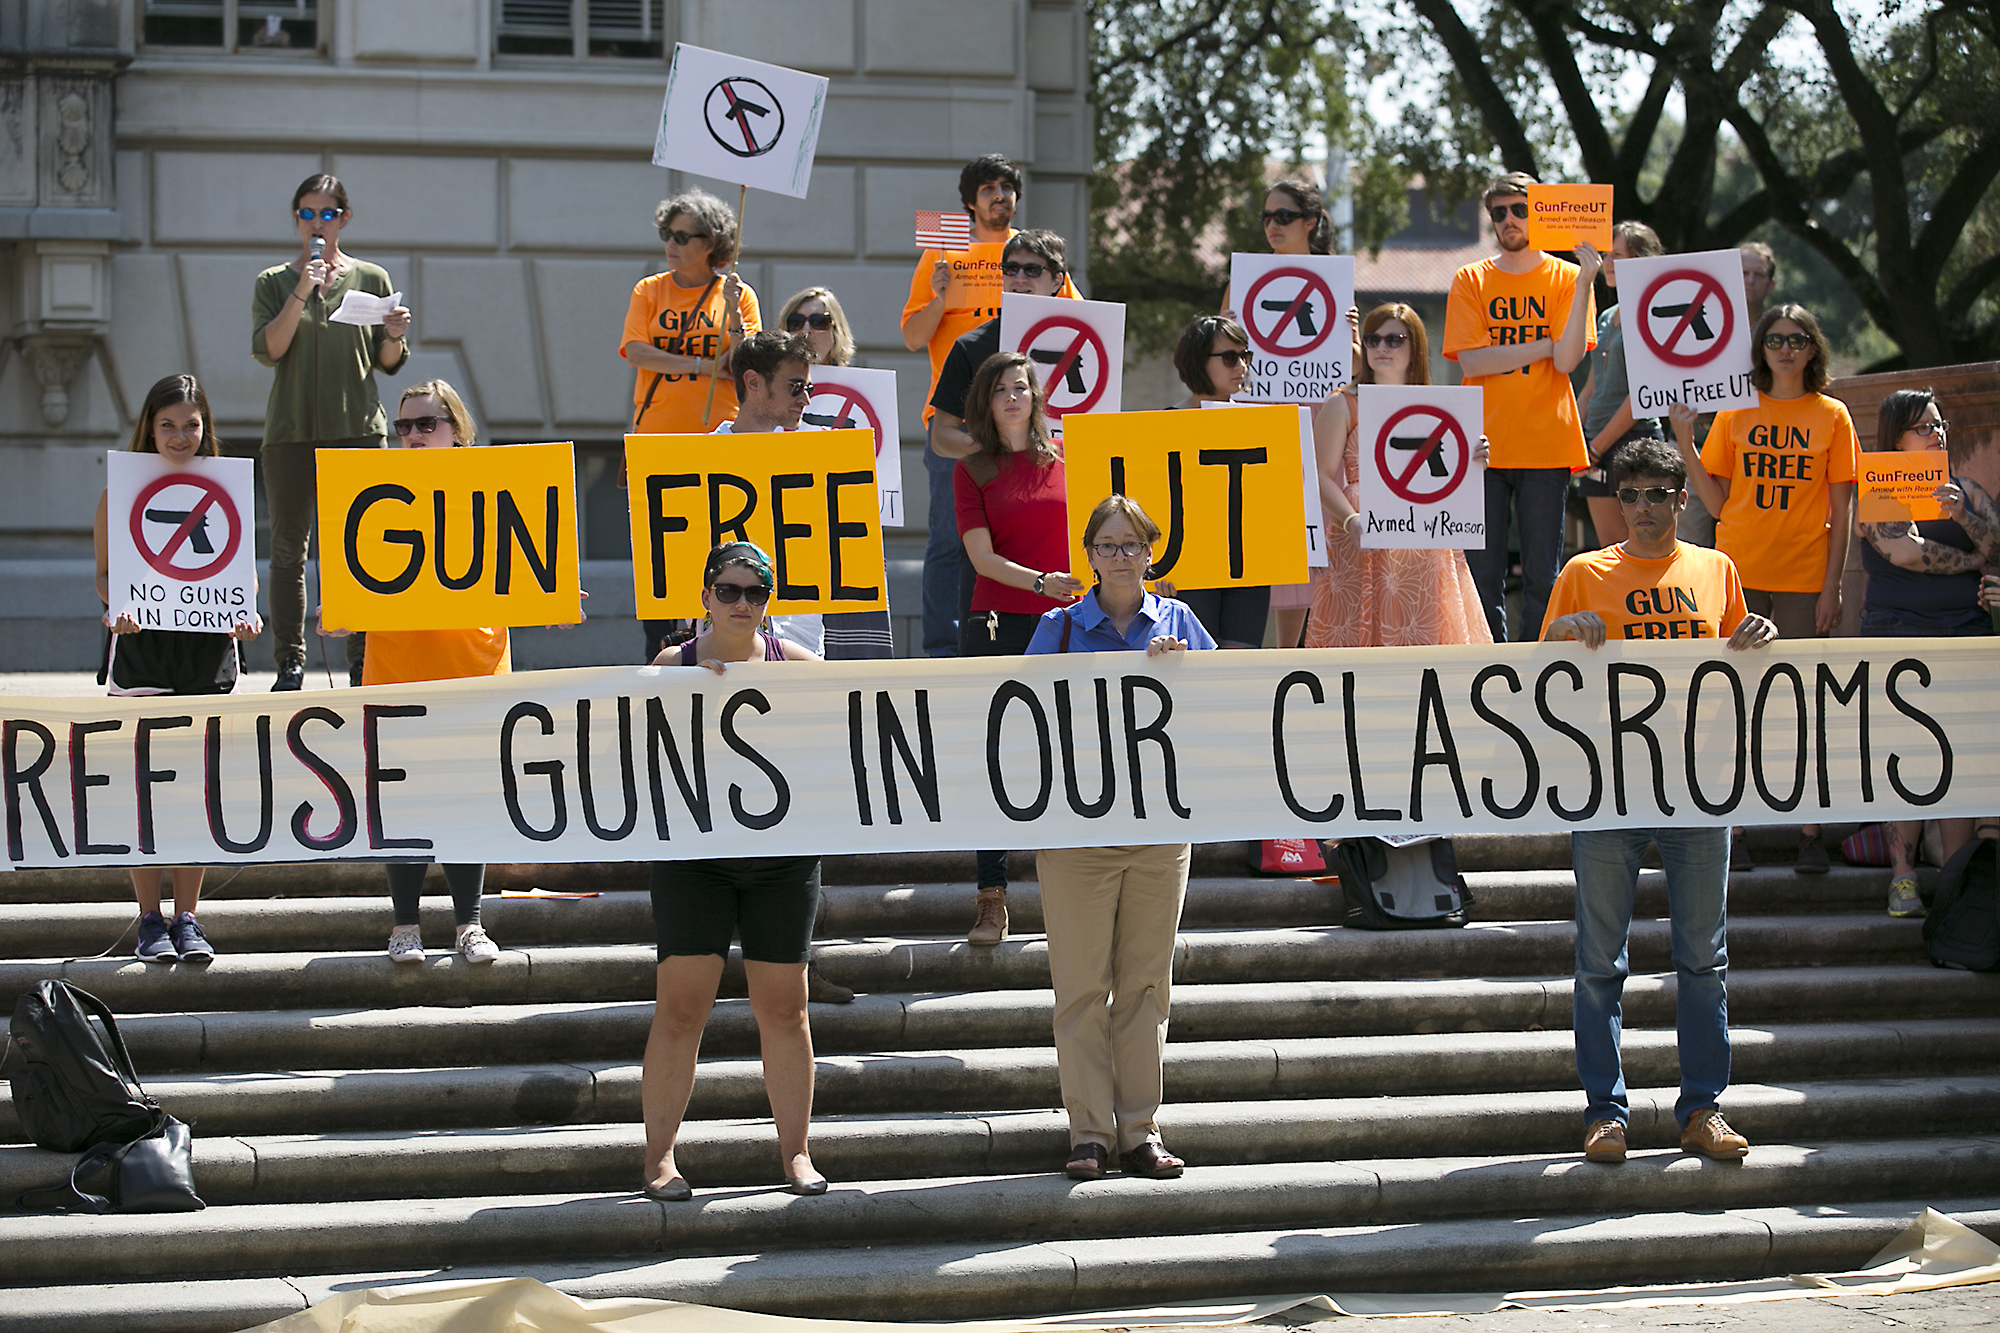 Protestors gathered on the West Mall of the University of Texas campus to oppose a new open carry law, Oct. 1, 2015. Gun rights activist plan on holding a mock mass shooting on the University of Texas campus. (Ralph Barrera—AP)